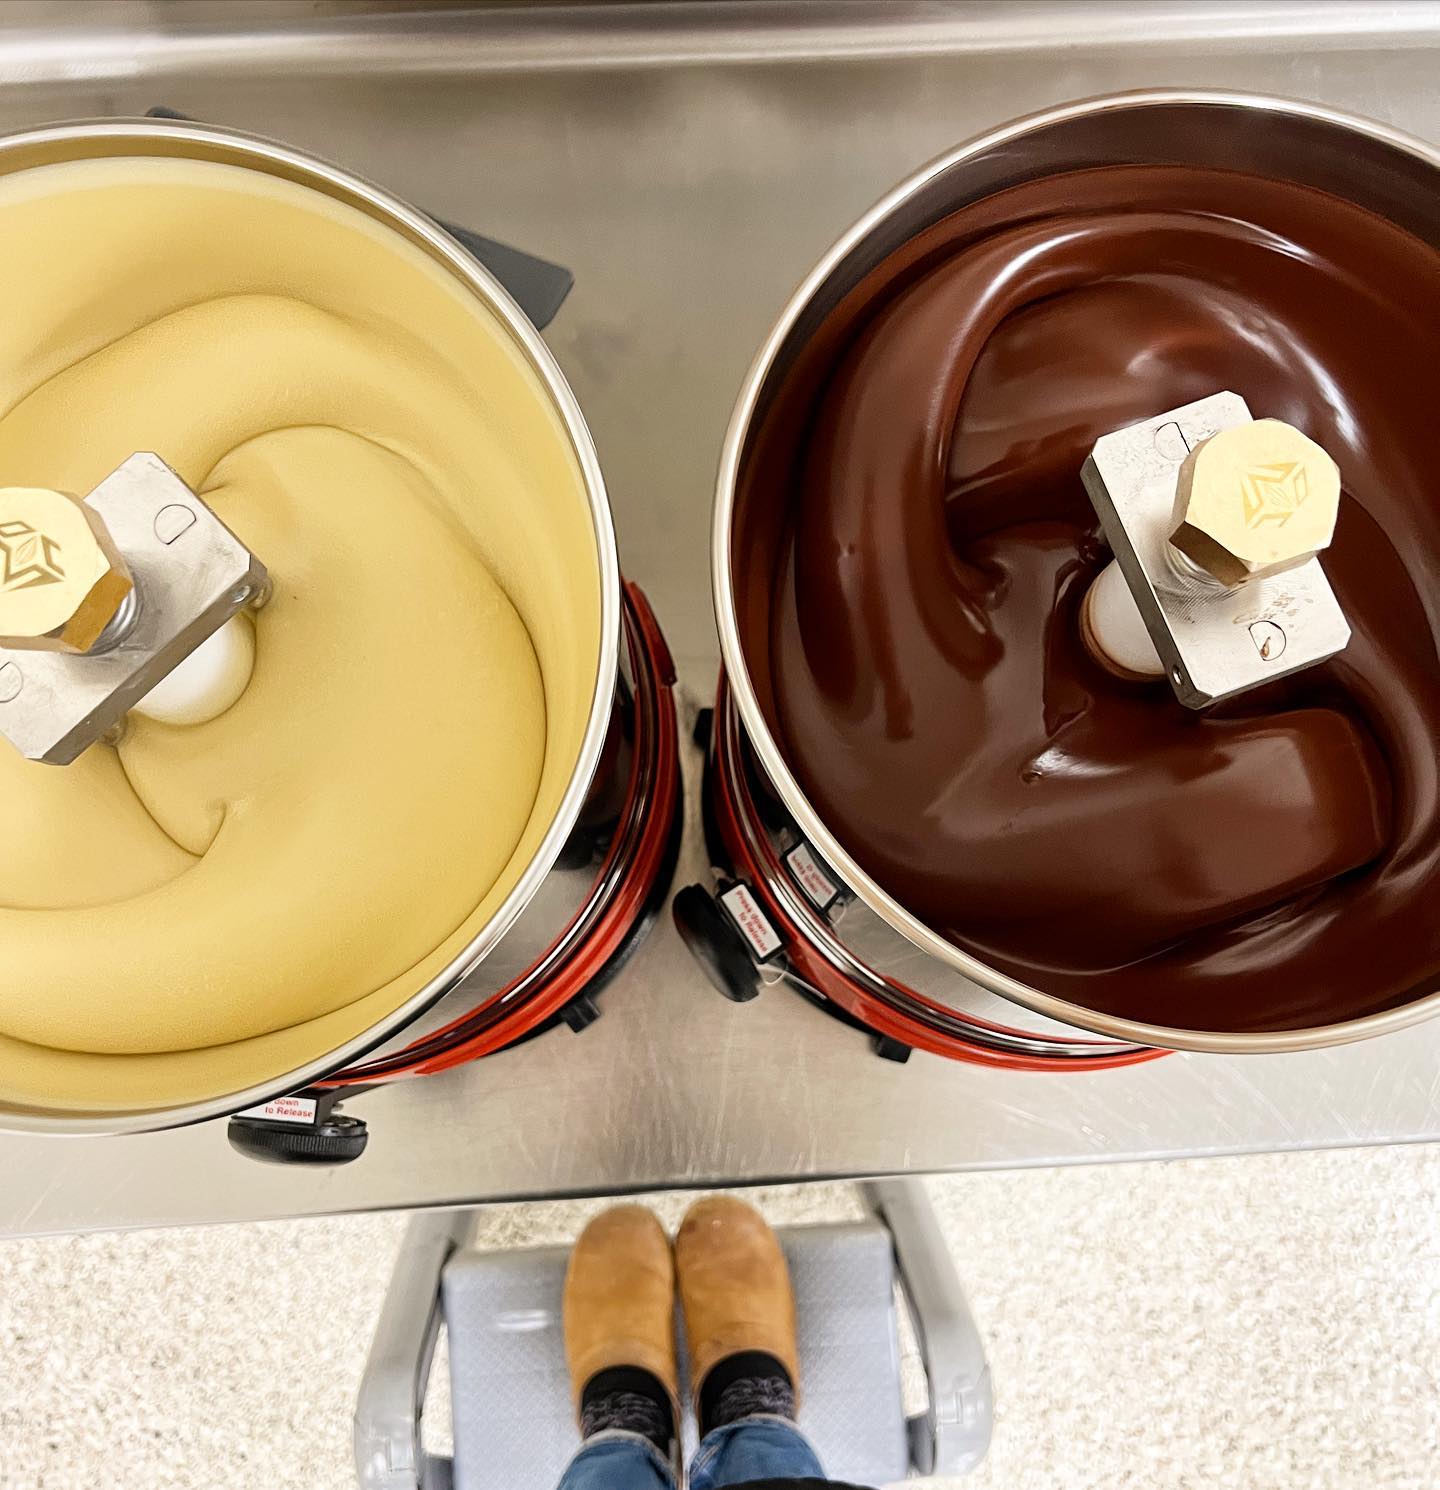 Top-down view of two commercial mixing bowls containing white and milk chocolate, with a person standing between them, seen only from the waist down.